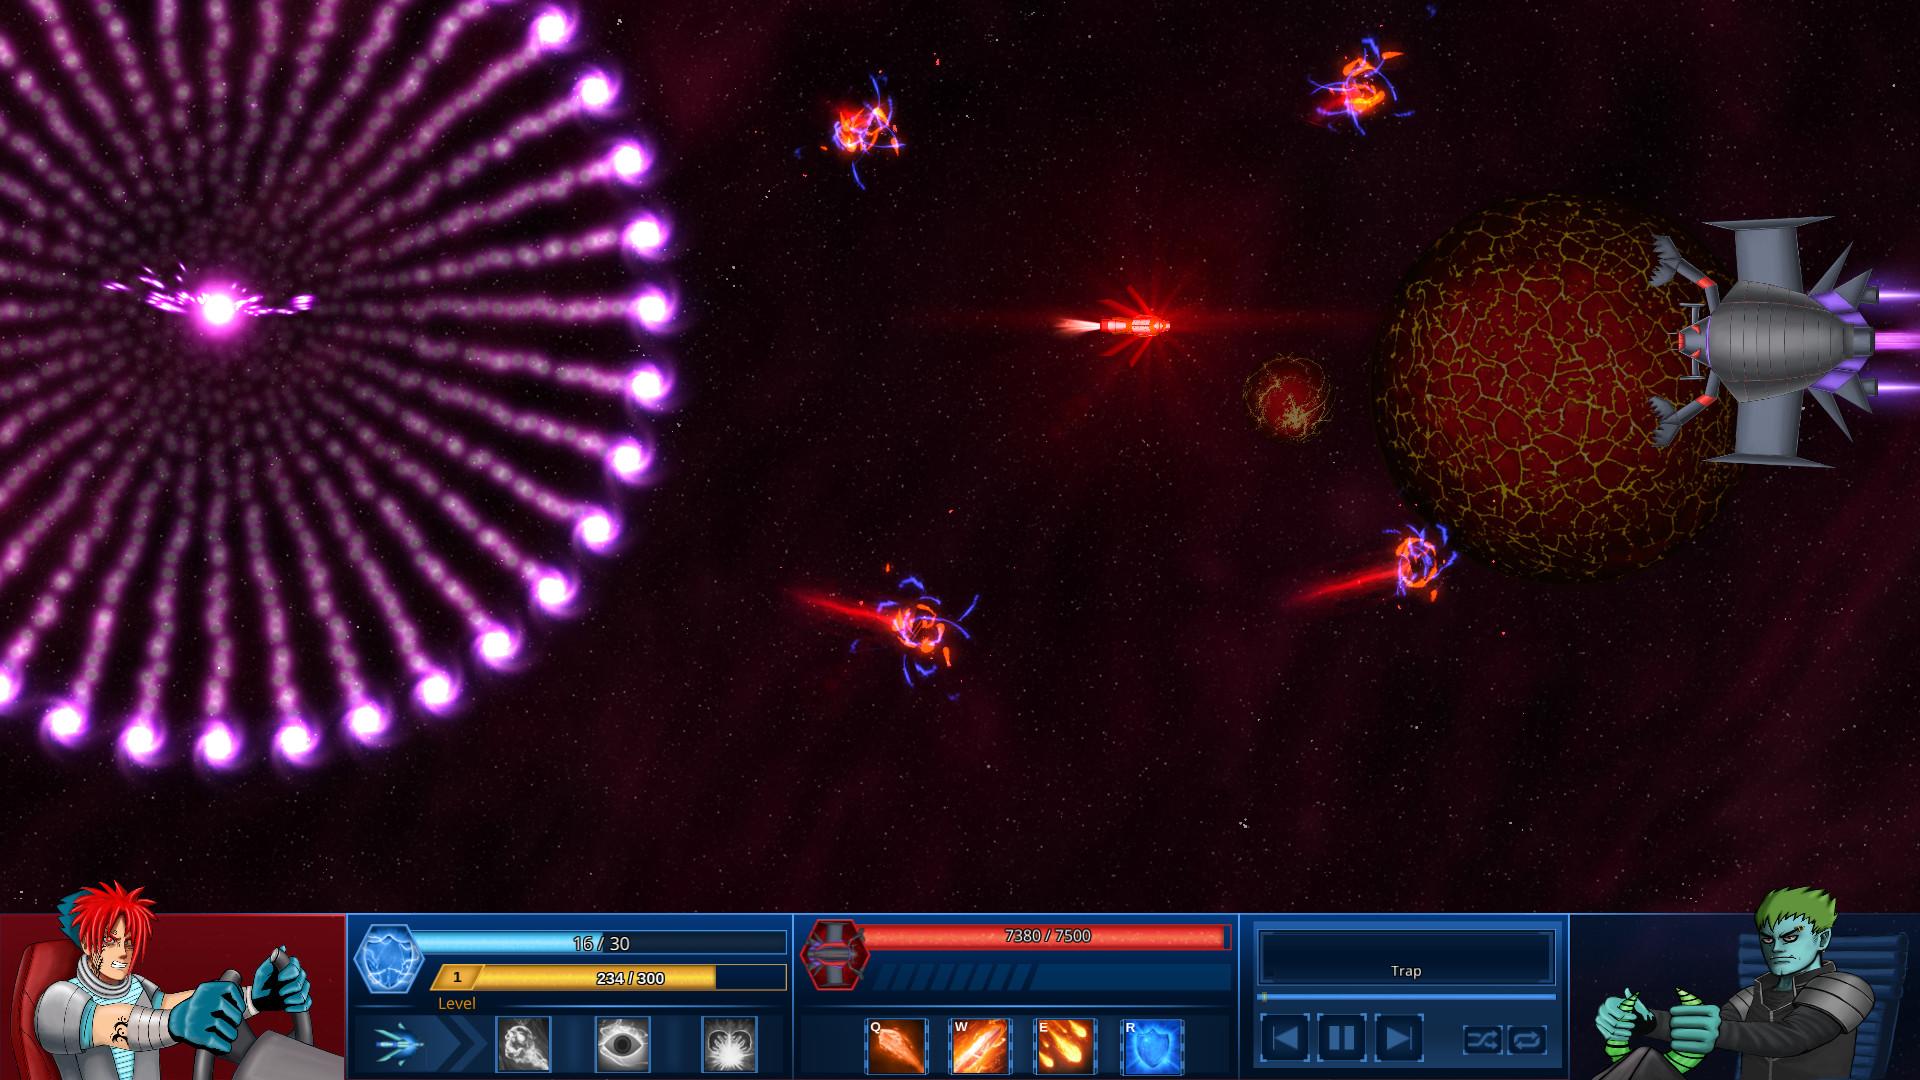 Screenshot №30 from game Survive in Space